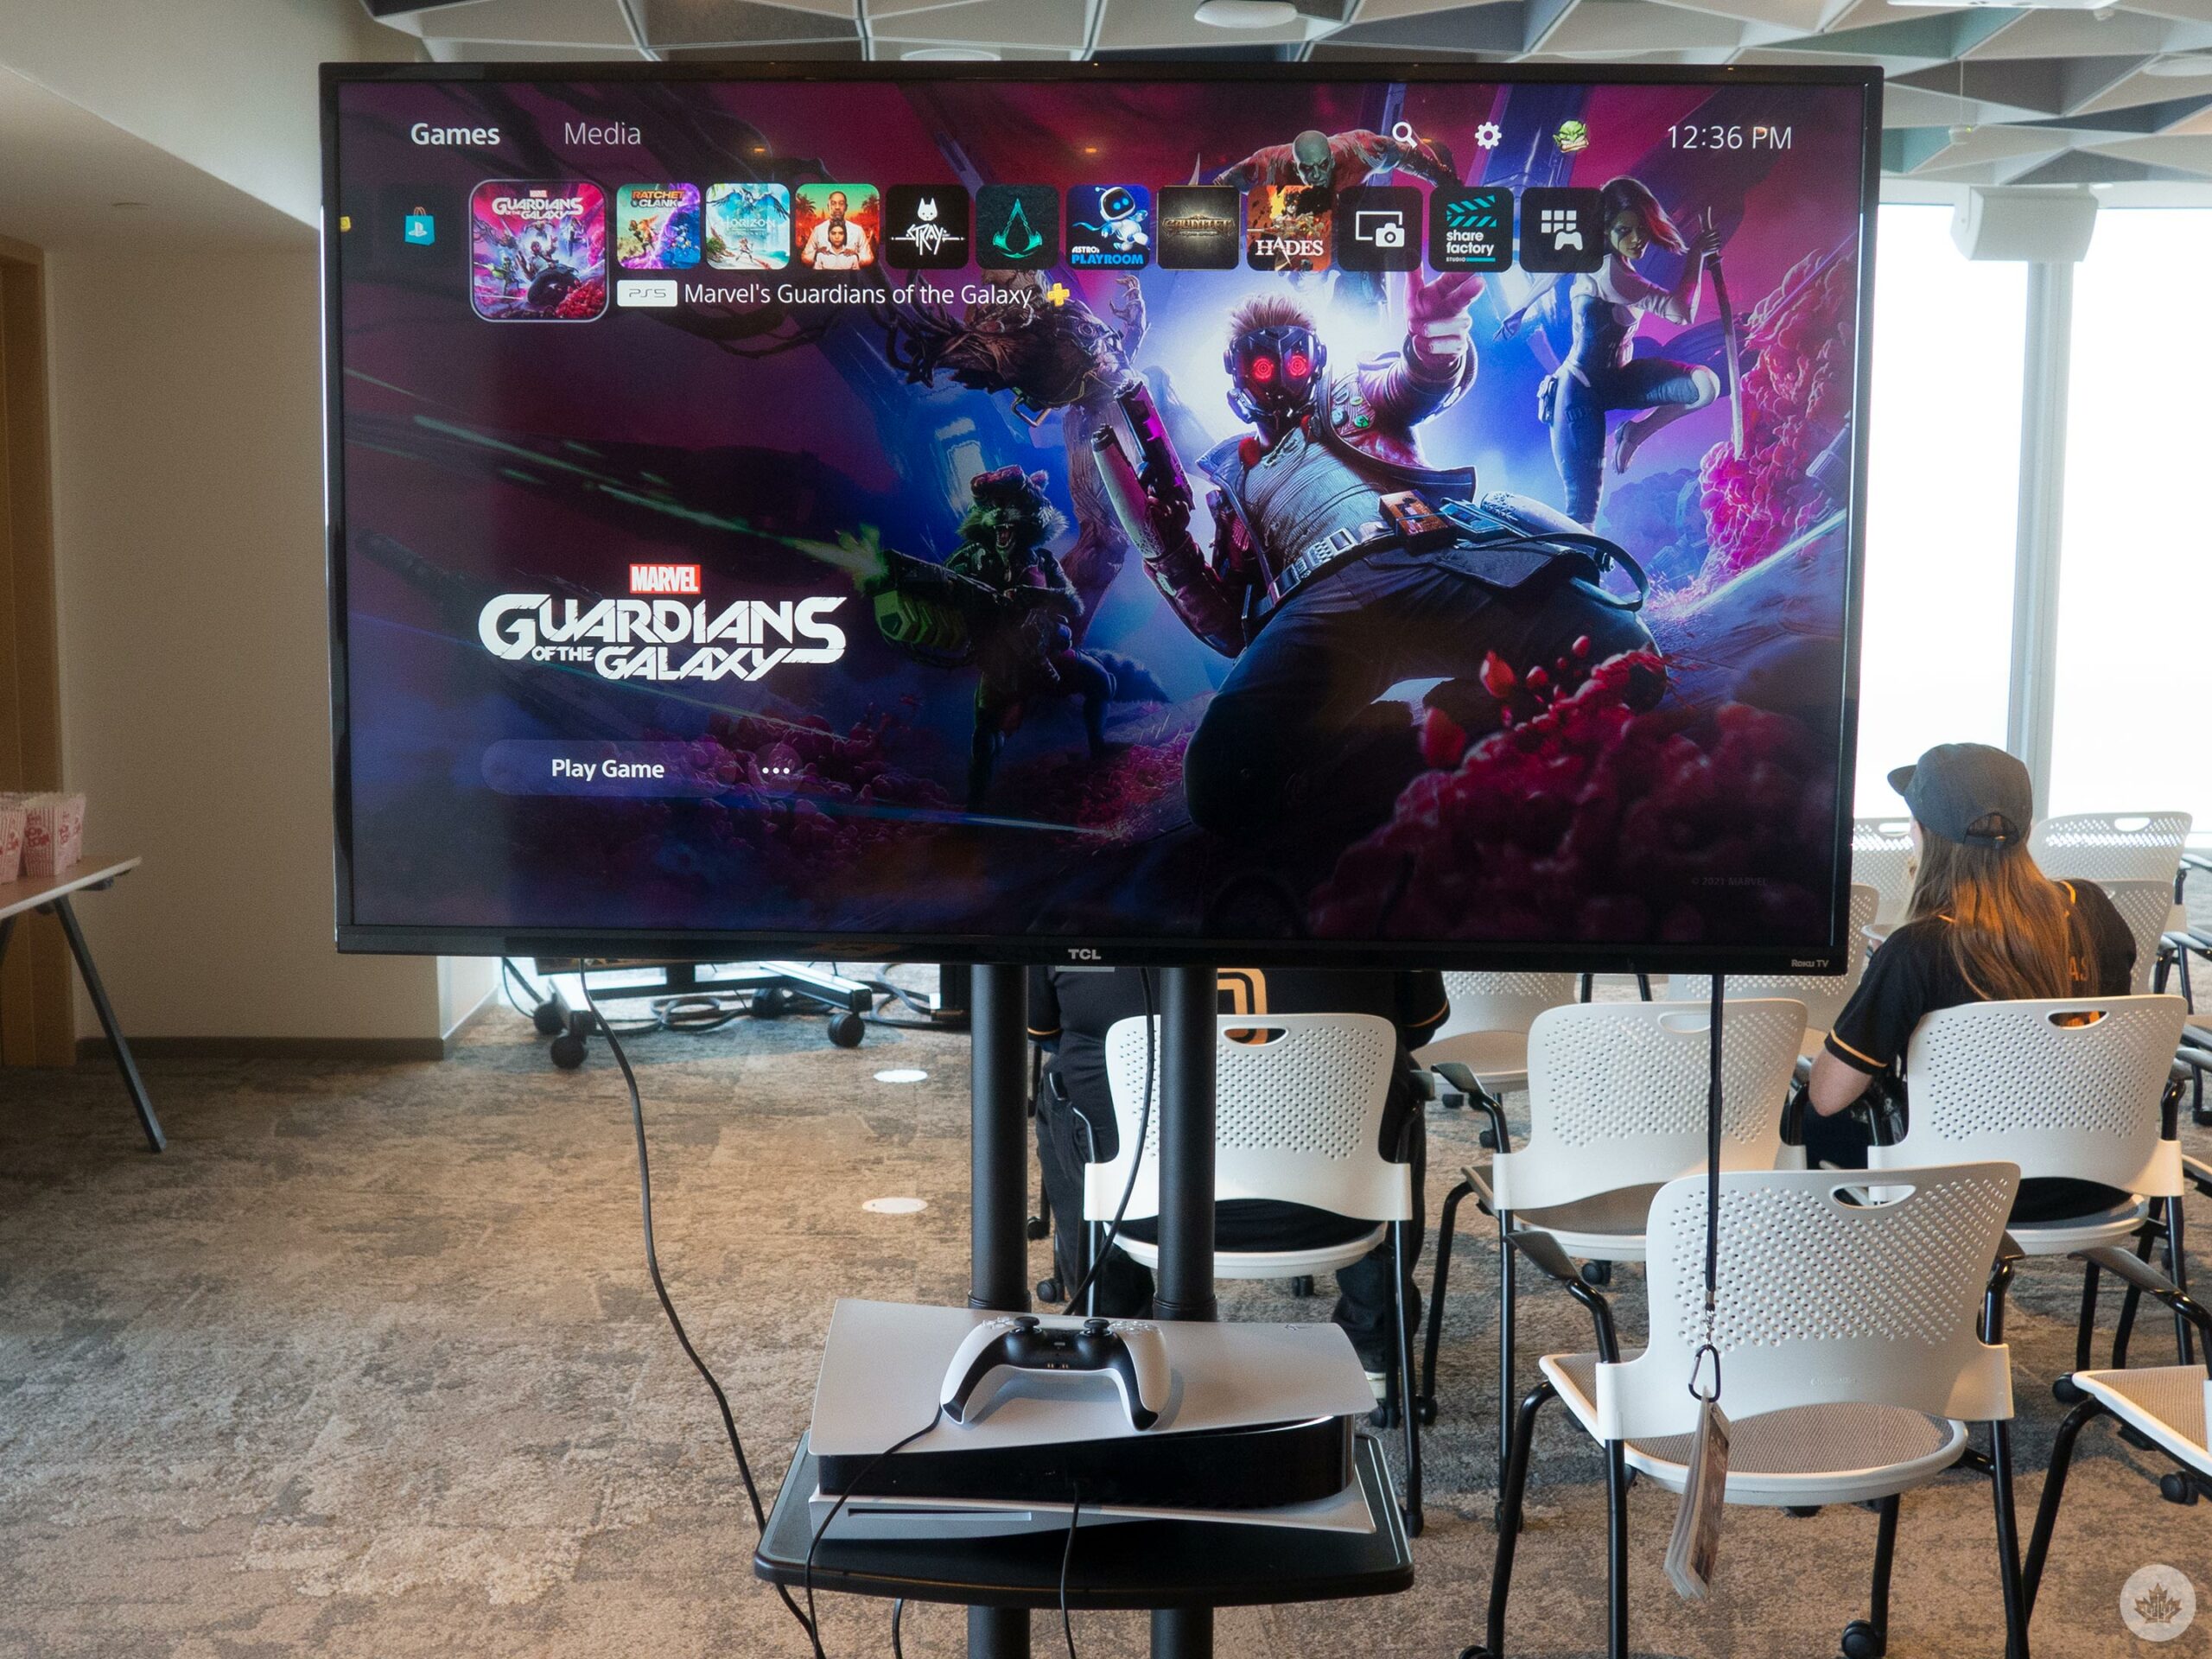 Marvel's Guardians of the Galaxy running on a PS5 console.